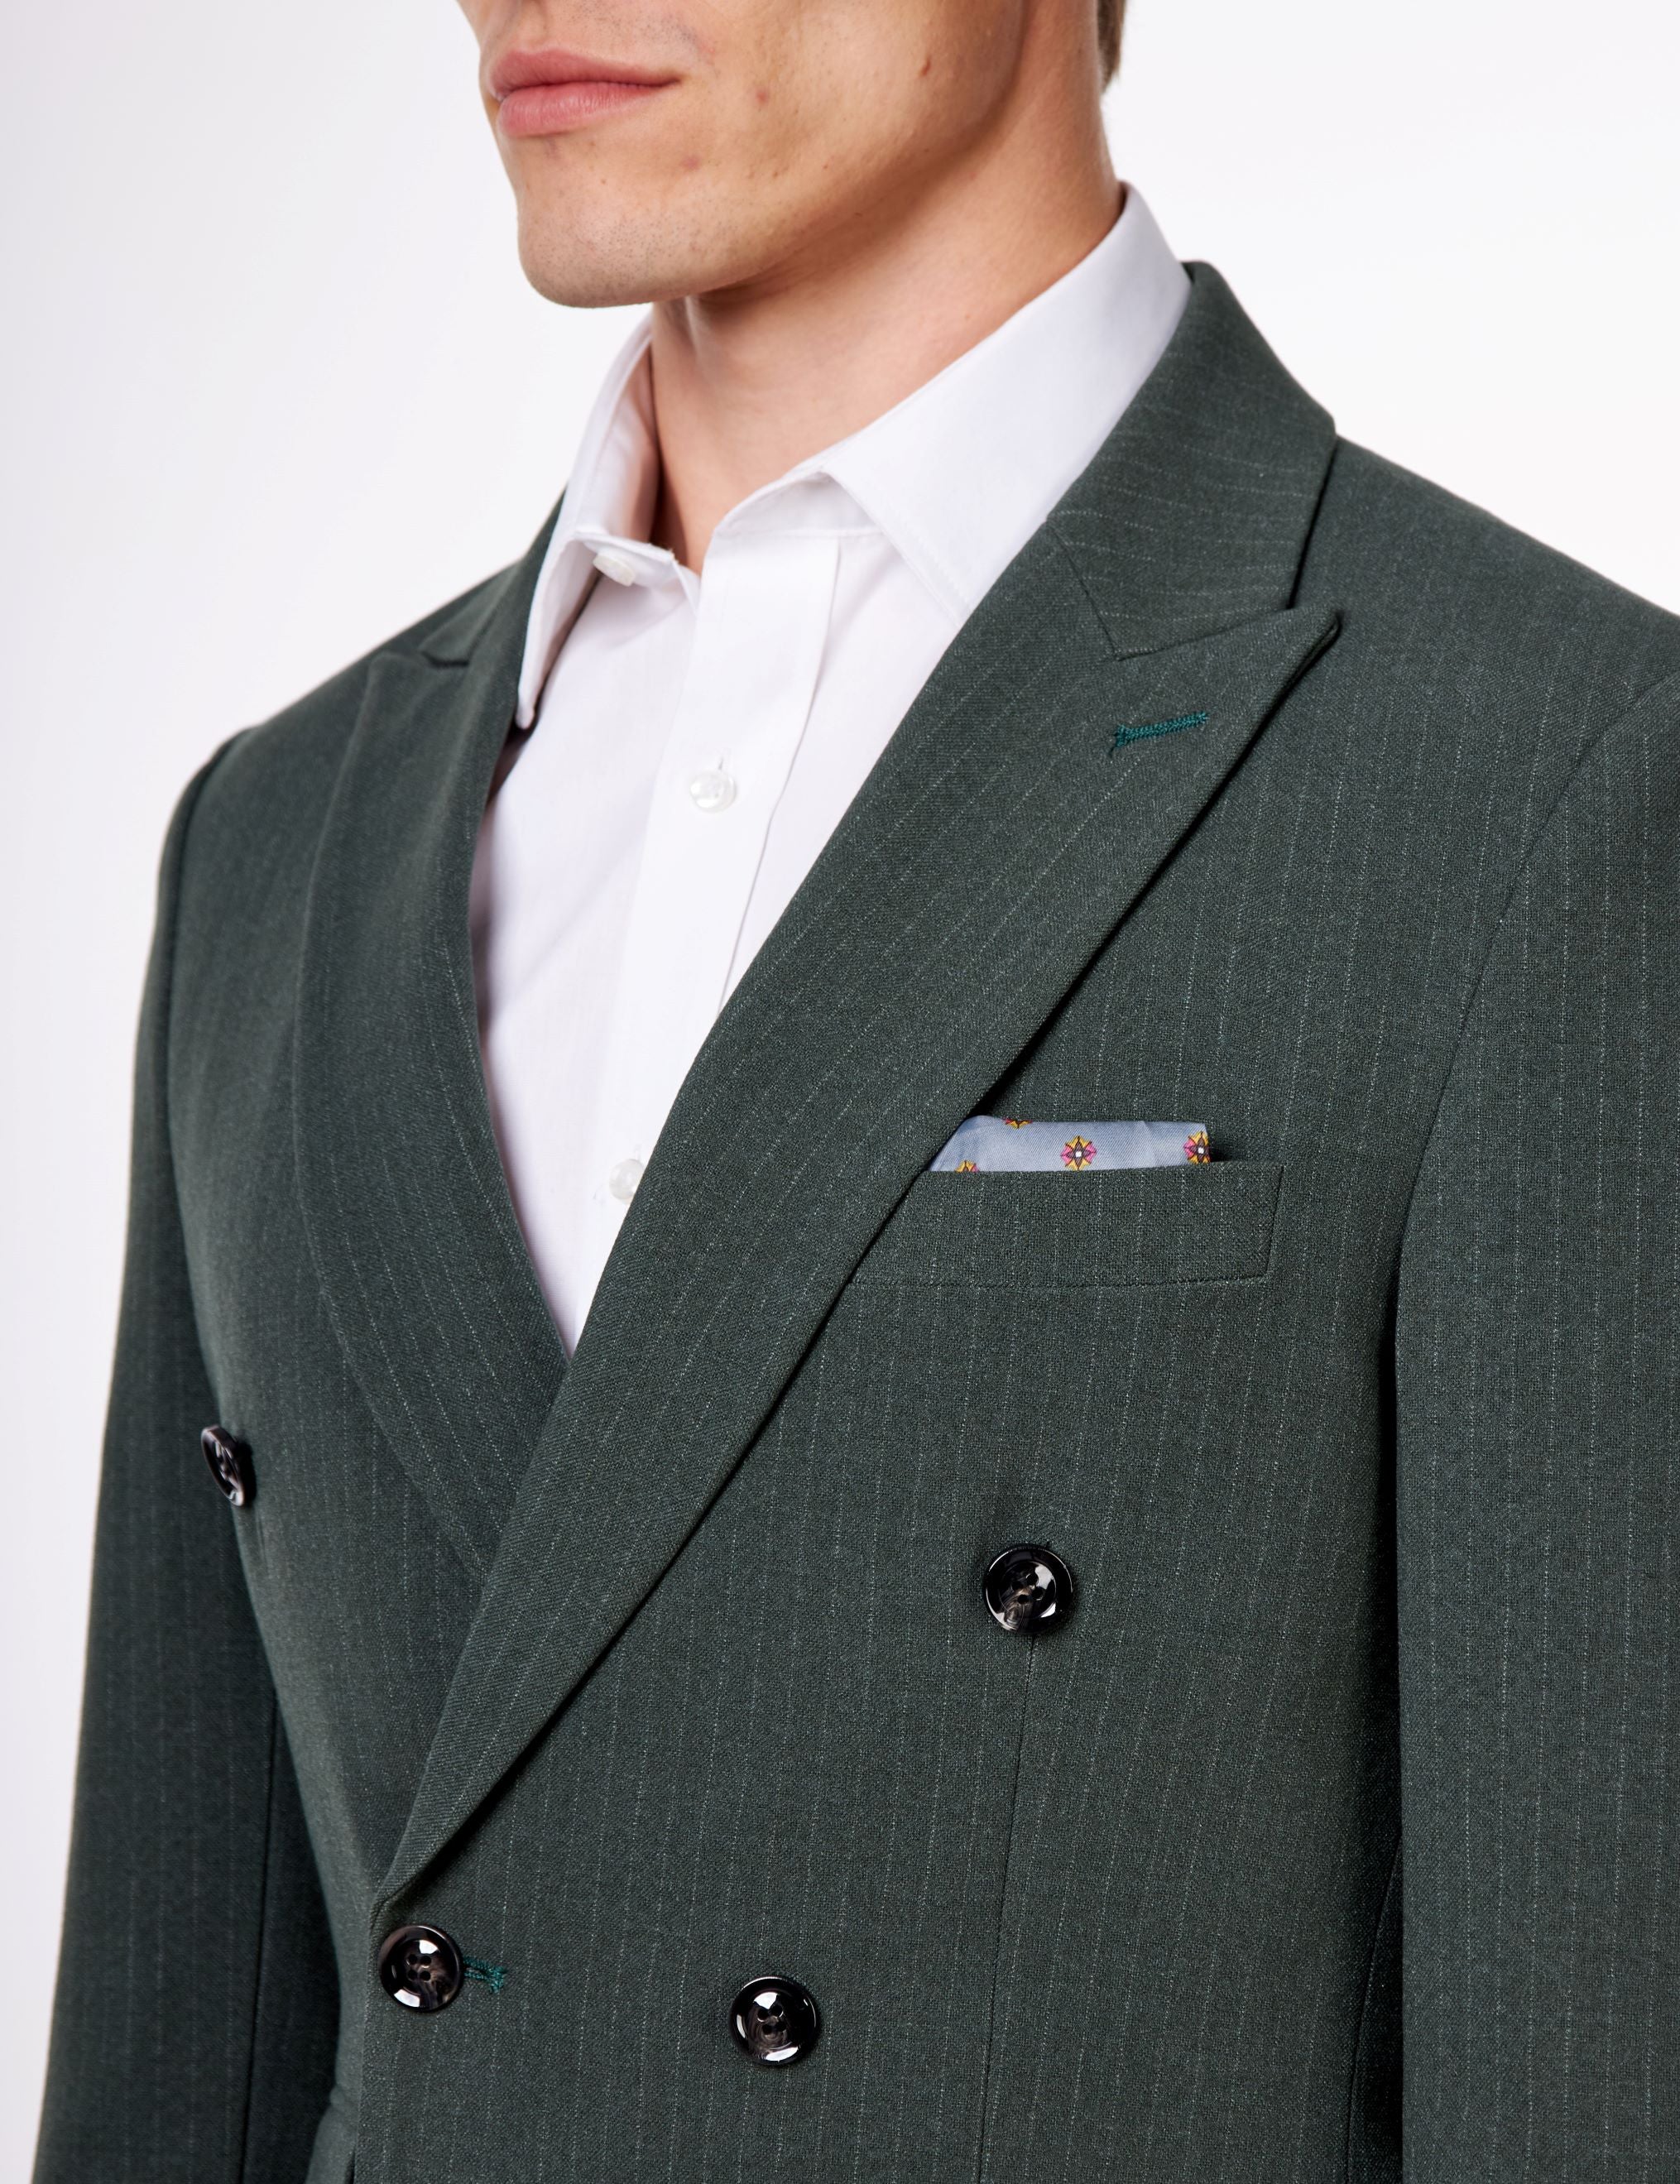 WILLIAM – GREEN DOUBLE BREASTED PINSTRIPE  JACKET